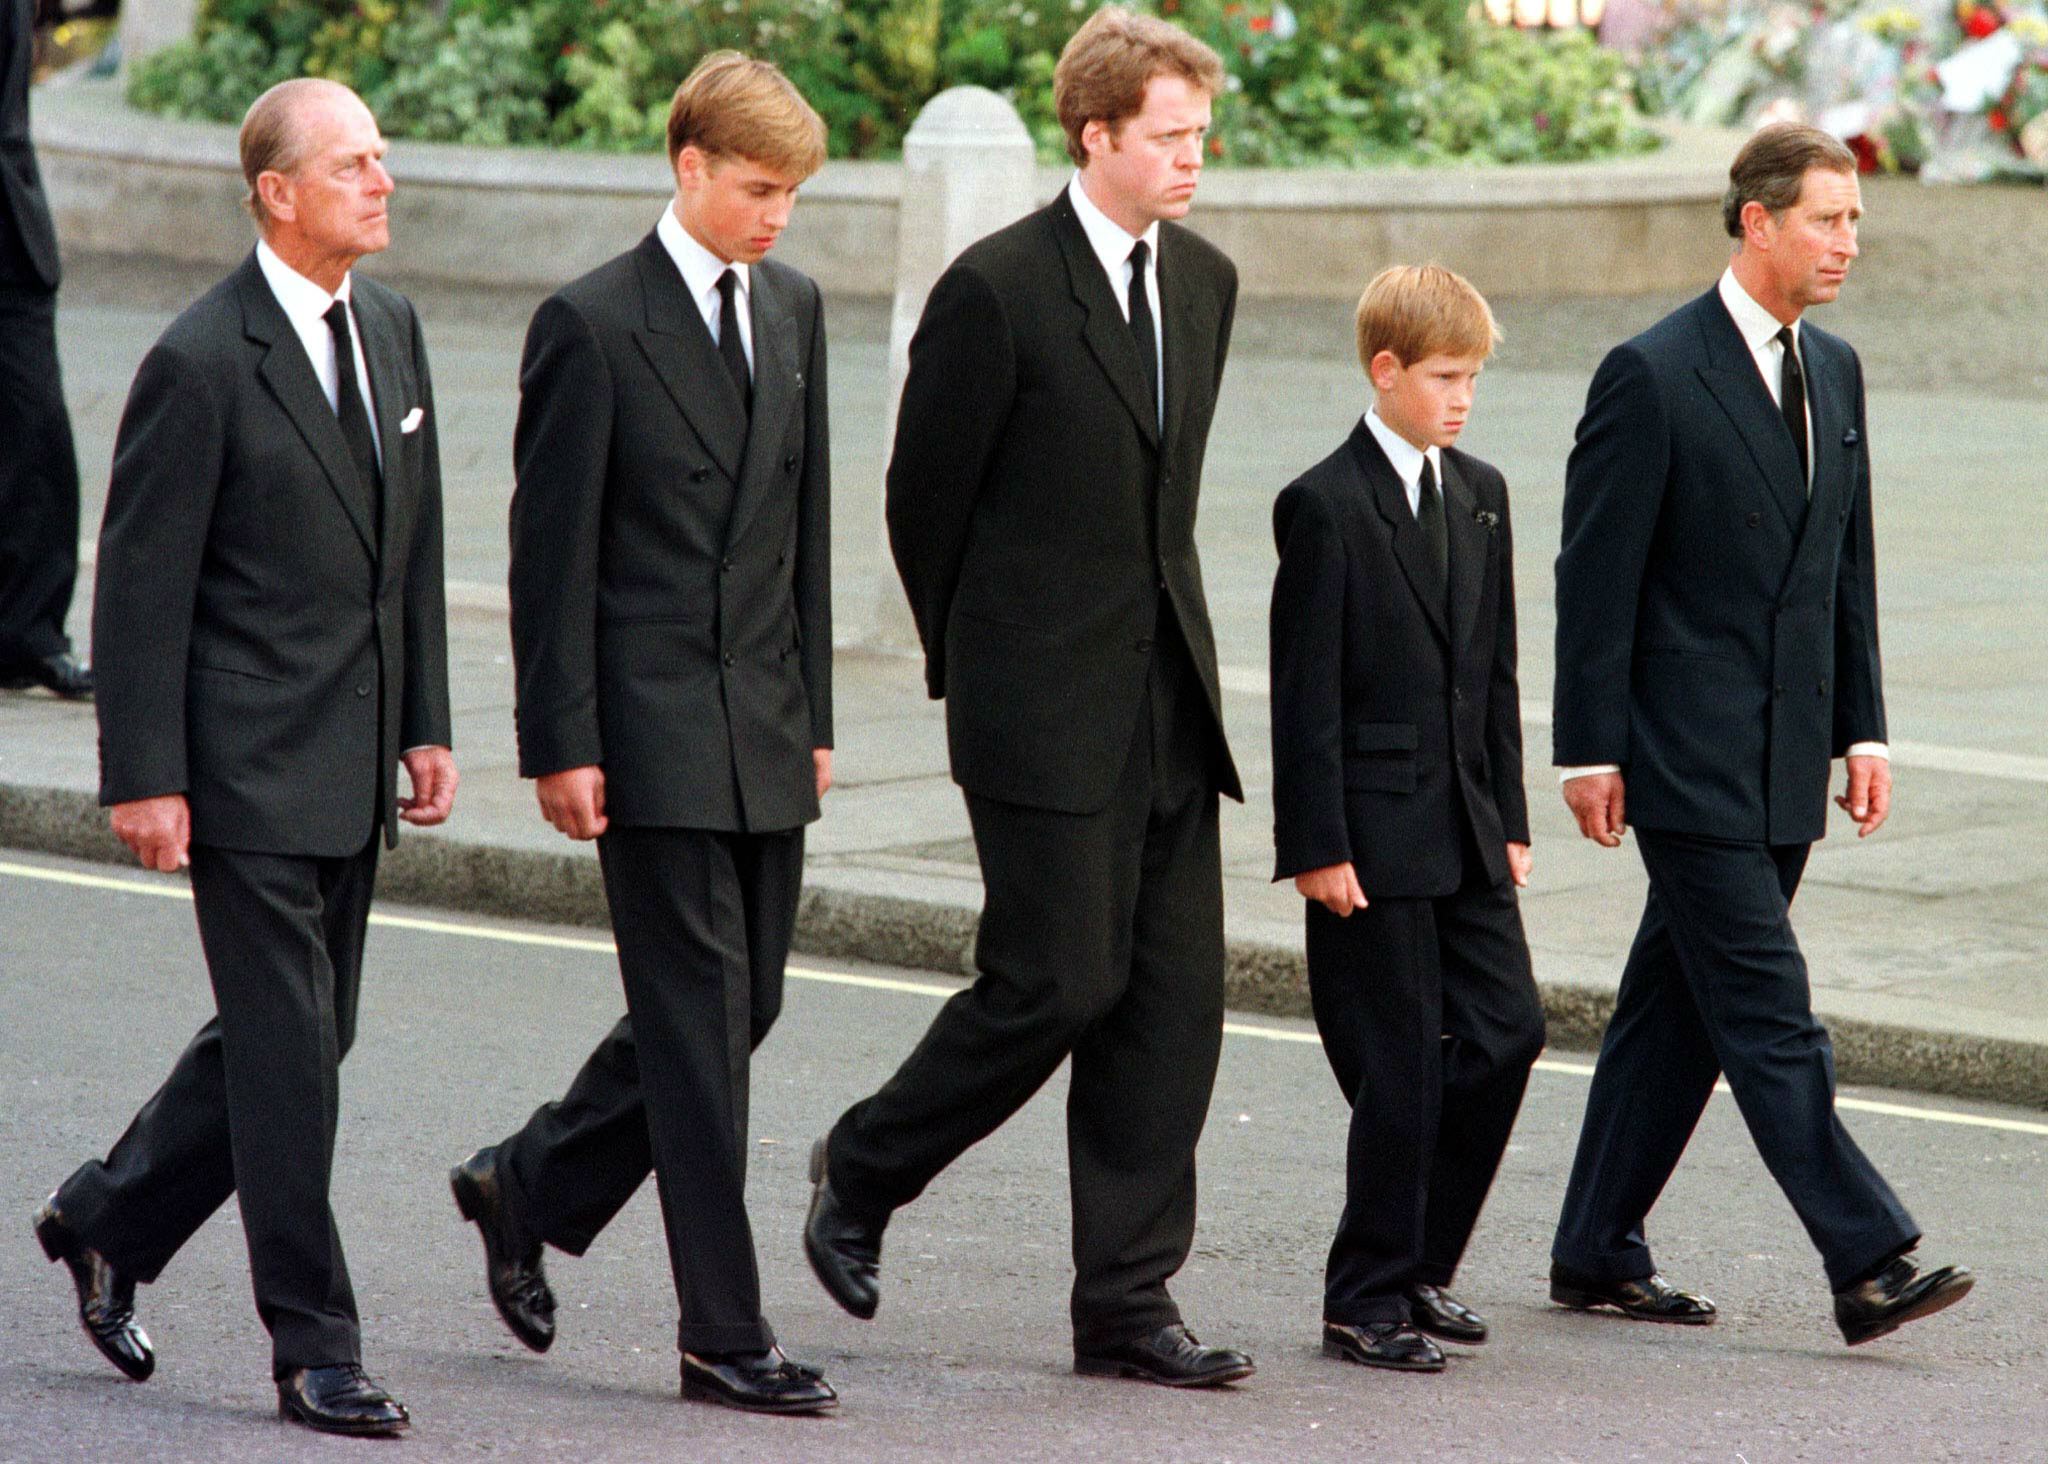 Prince Philip, Prince William, Earl Spencer, Prince Harry and Prince Charles pictured walking outside Westminster Abbey during the funeral service for Diana, Princess of Wales, on September 6, 1997. / Source: Getty Images